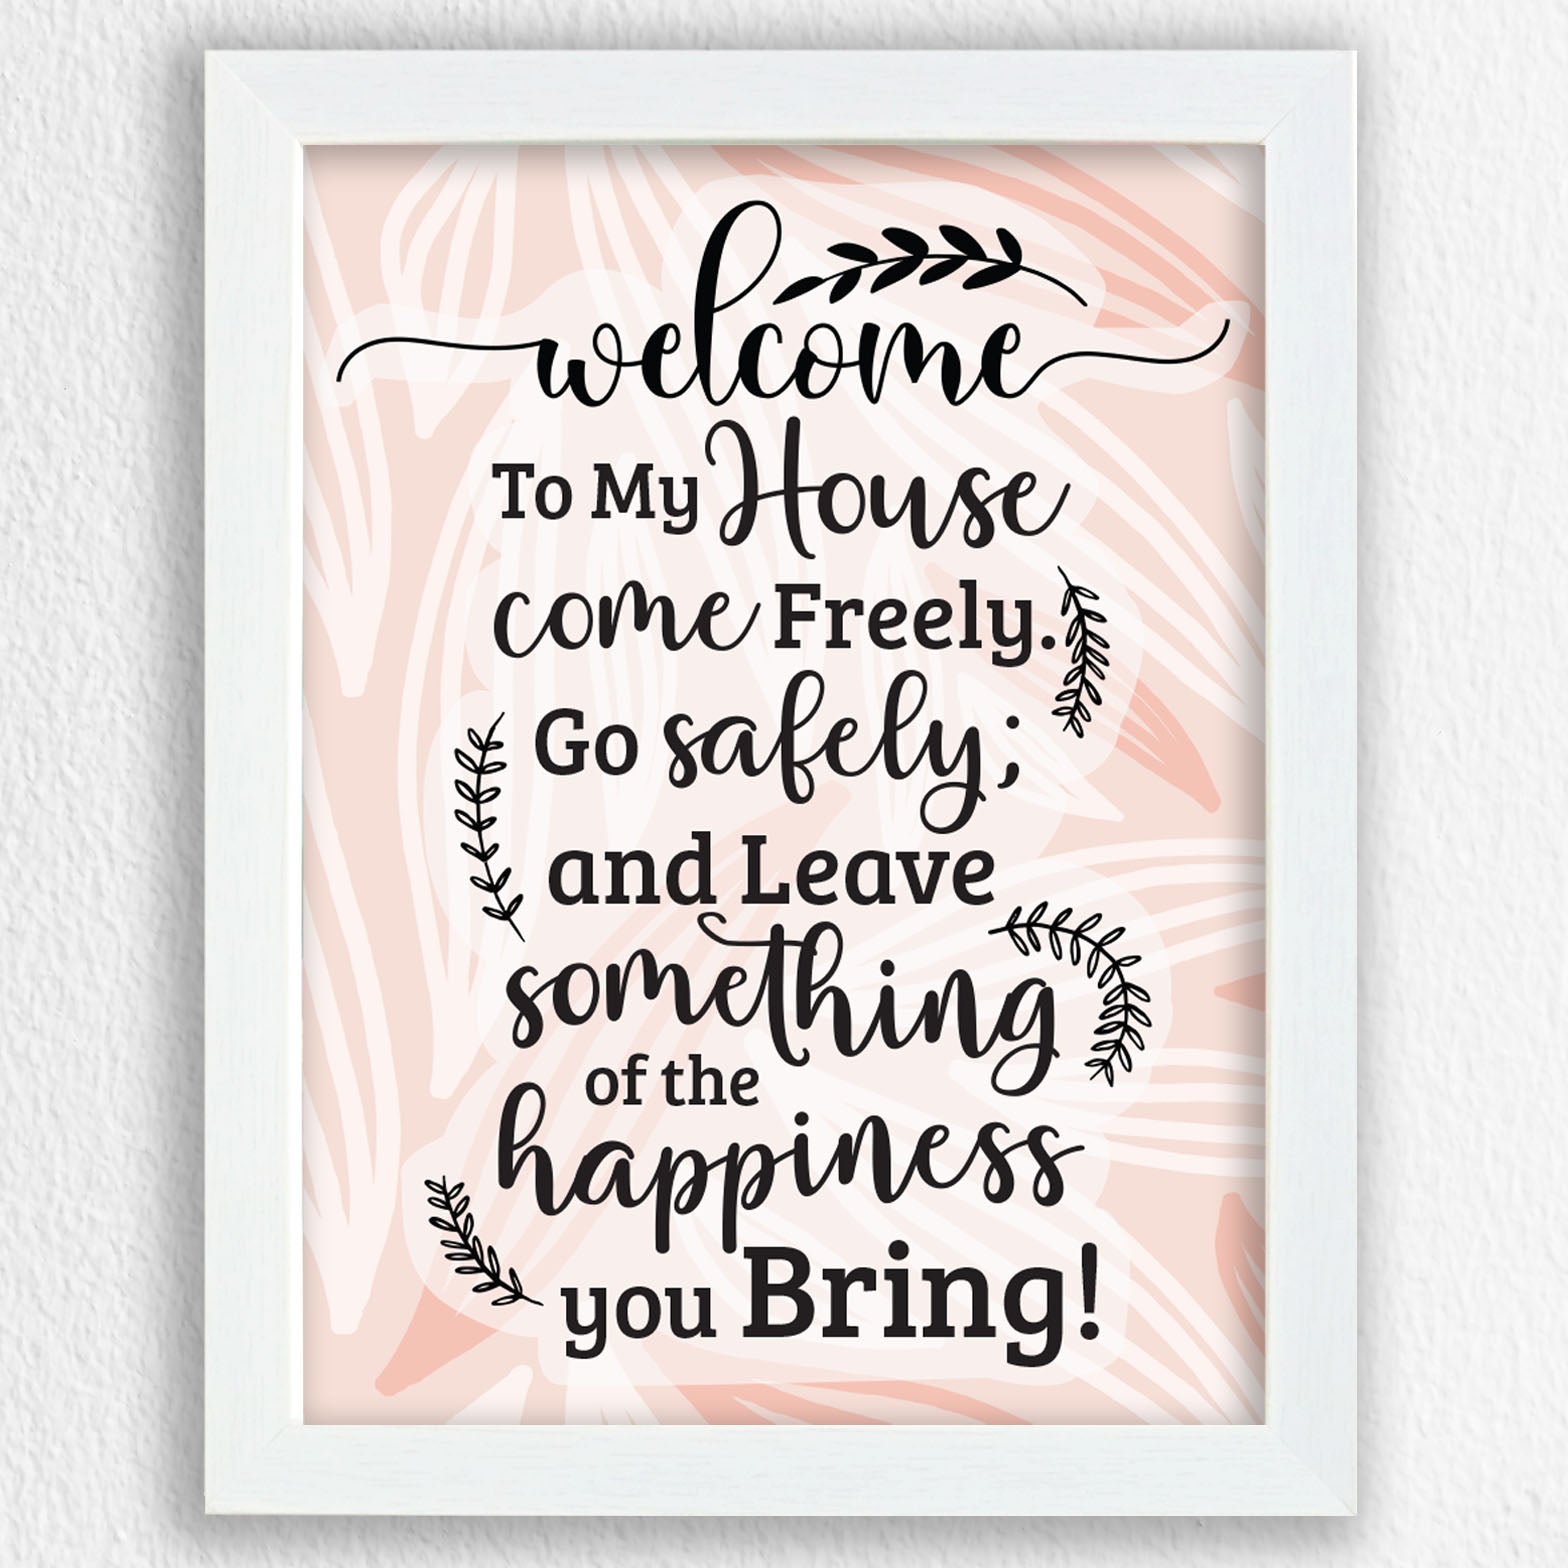 Welcome To My House - Art Frame